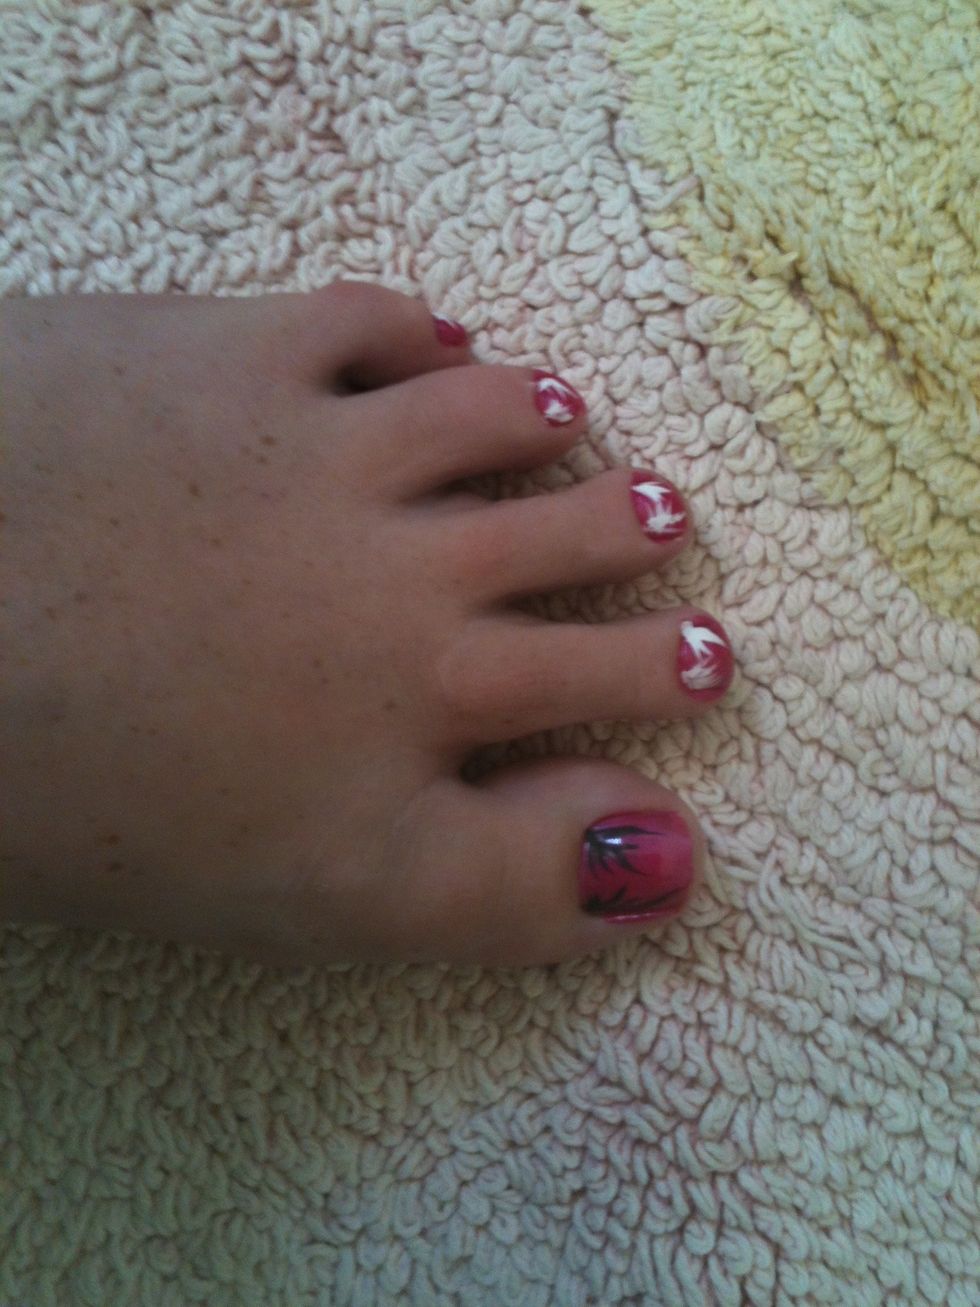 How to make your toes pretty - B+C Guides